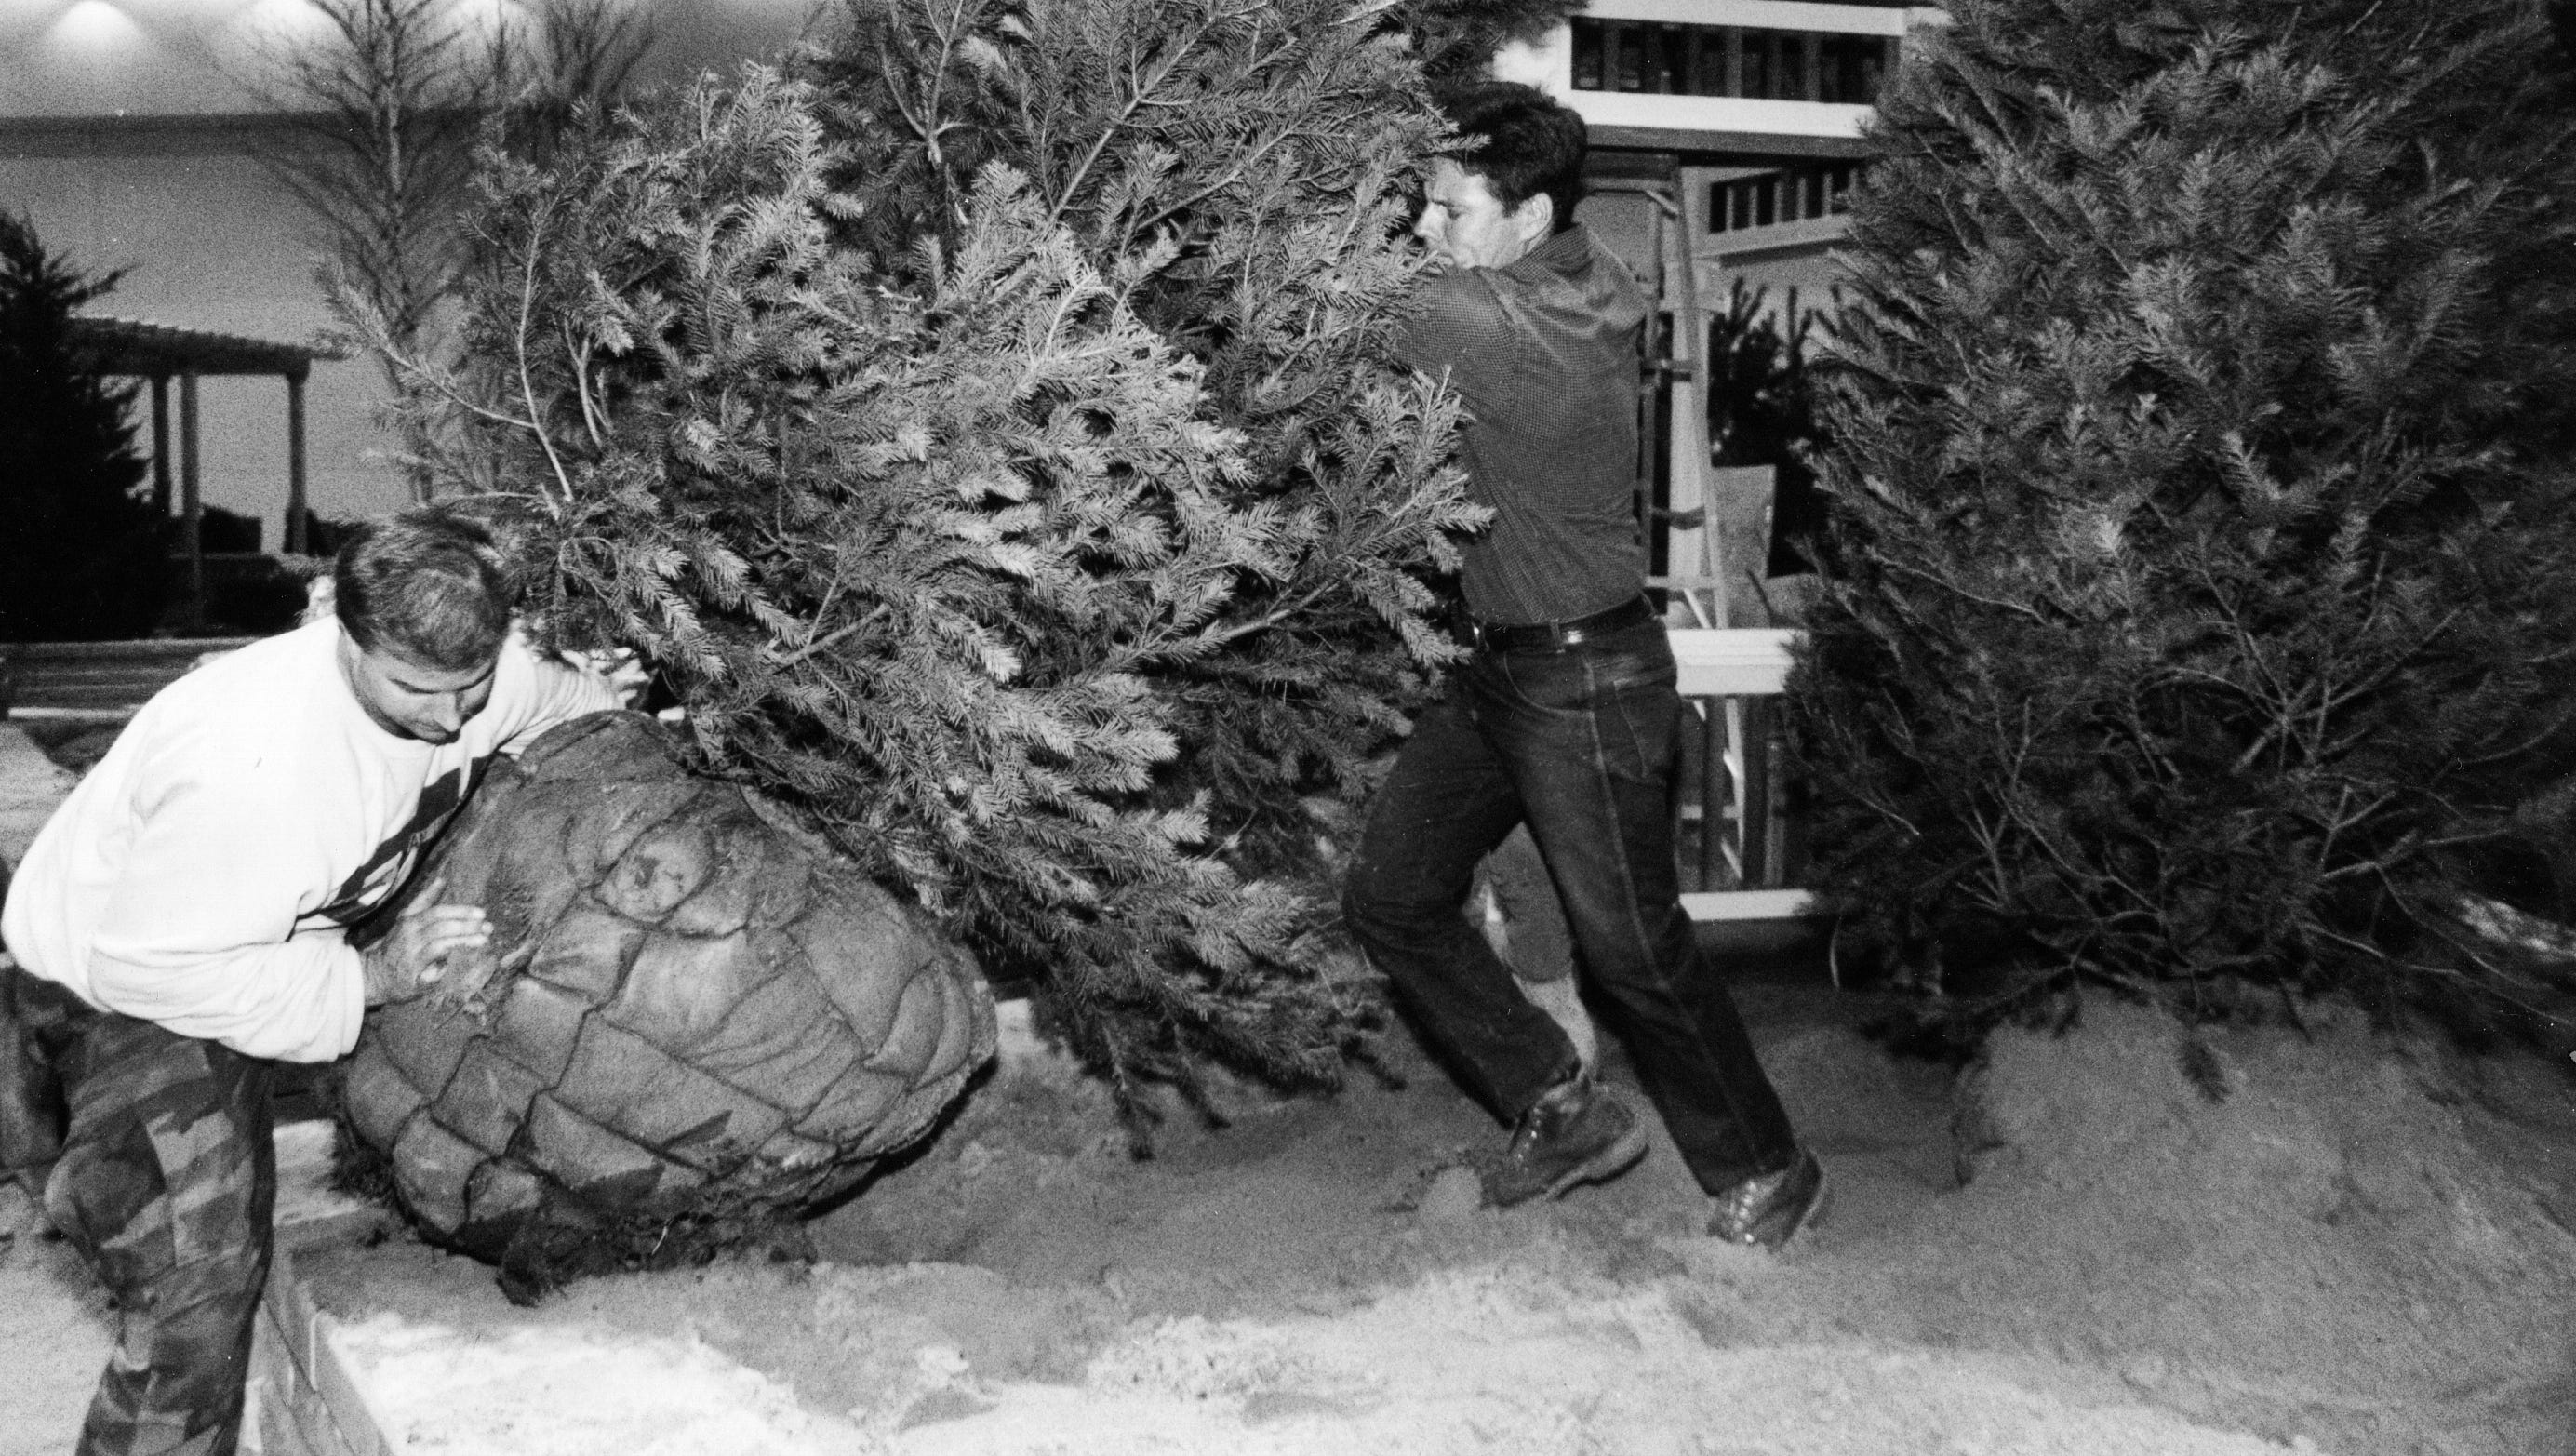 Workers move trees into place at the Detroit Home Flower, Furniture and Garden Show on March 20, 1991.